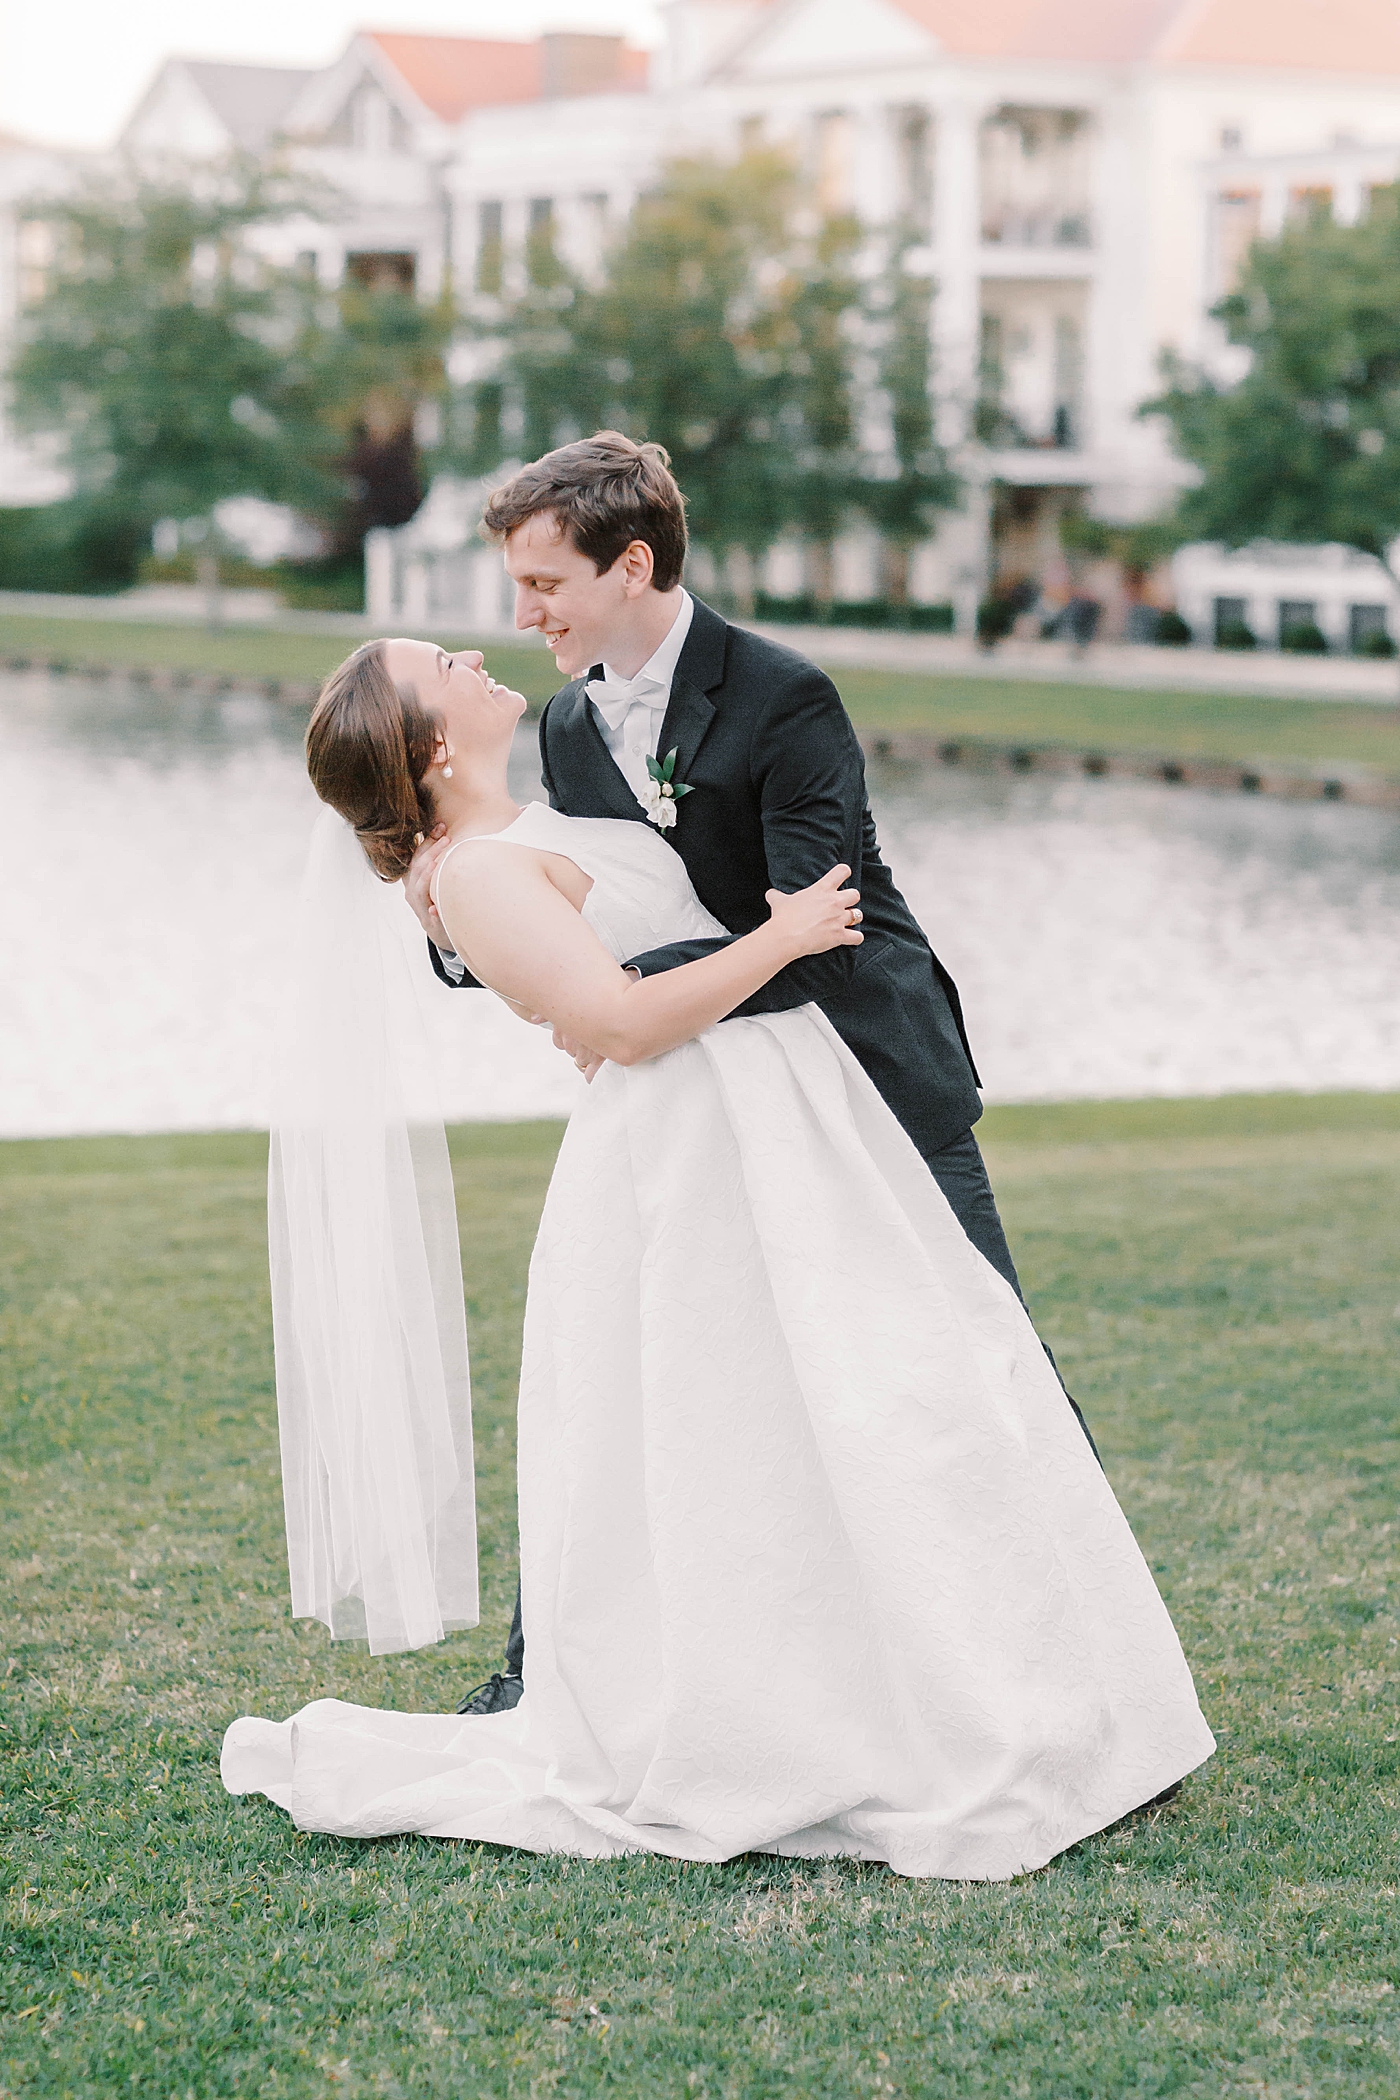 Bride and groom embracing near a pond | Carters Event Co